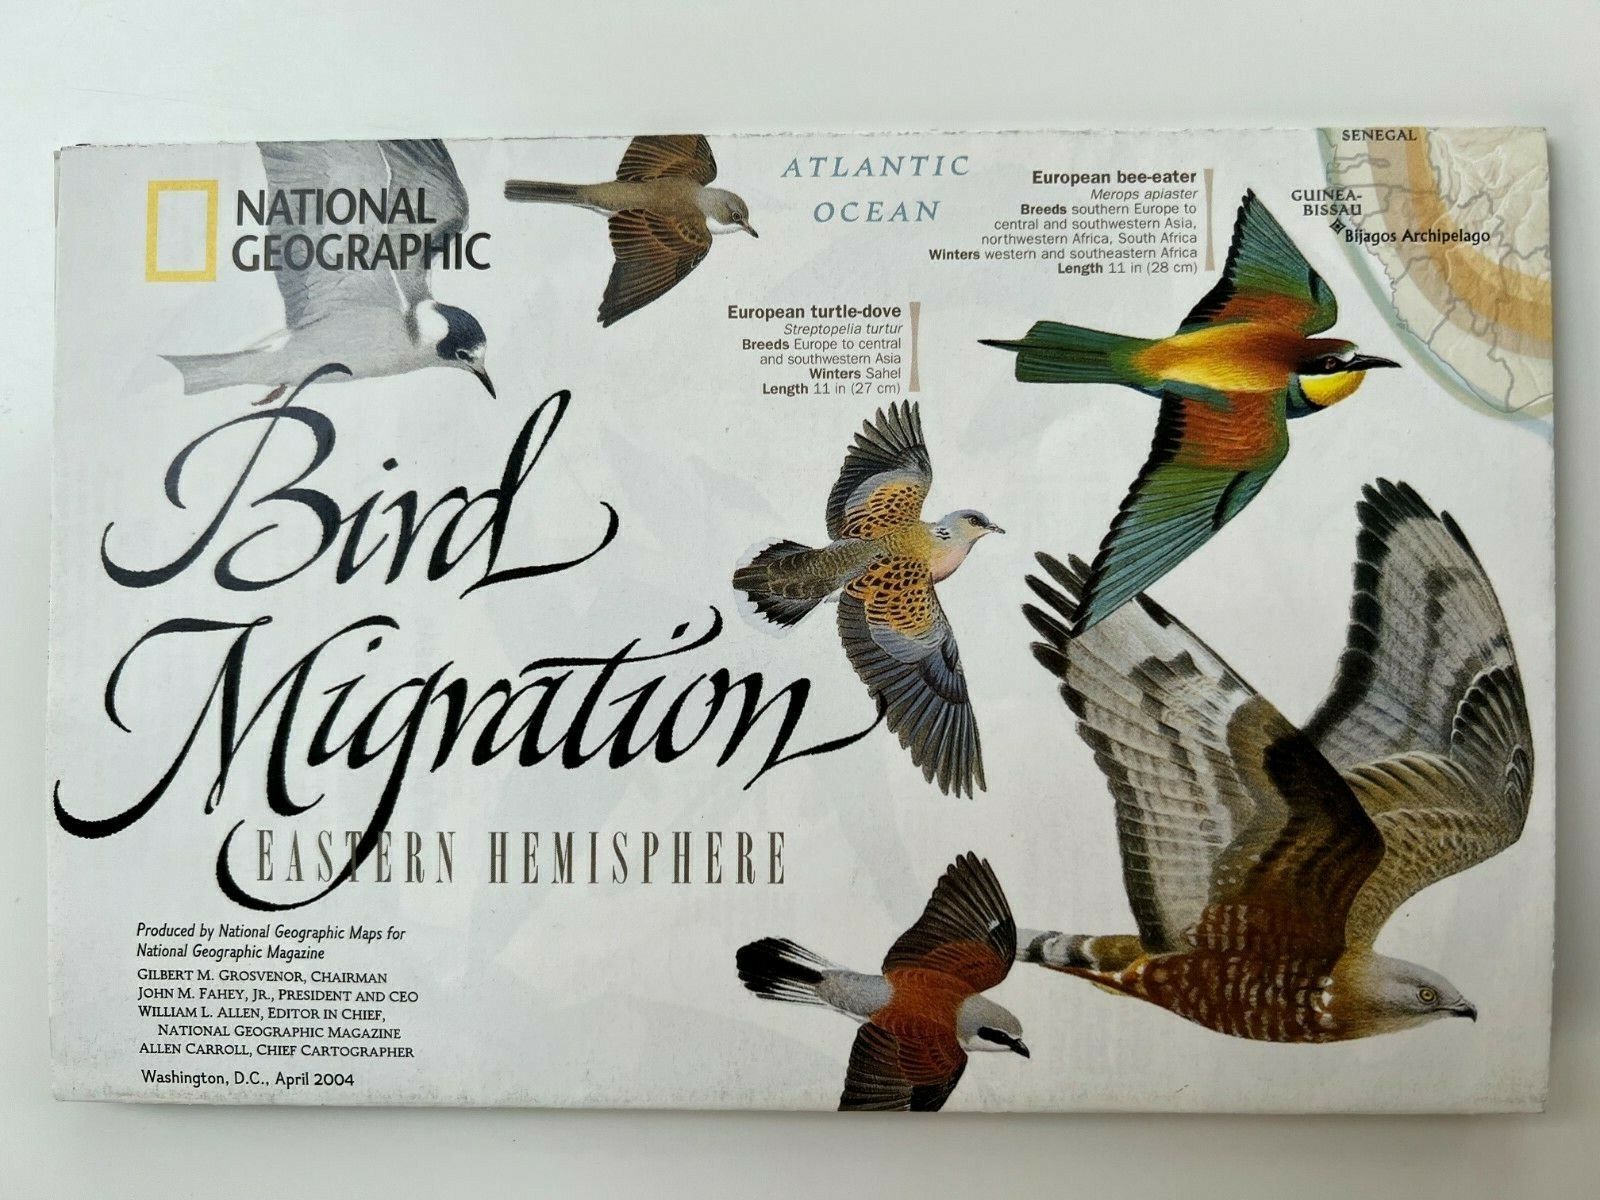 National Geographic Map Poster 2004 - Bird Migration East & West Hemispheres